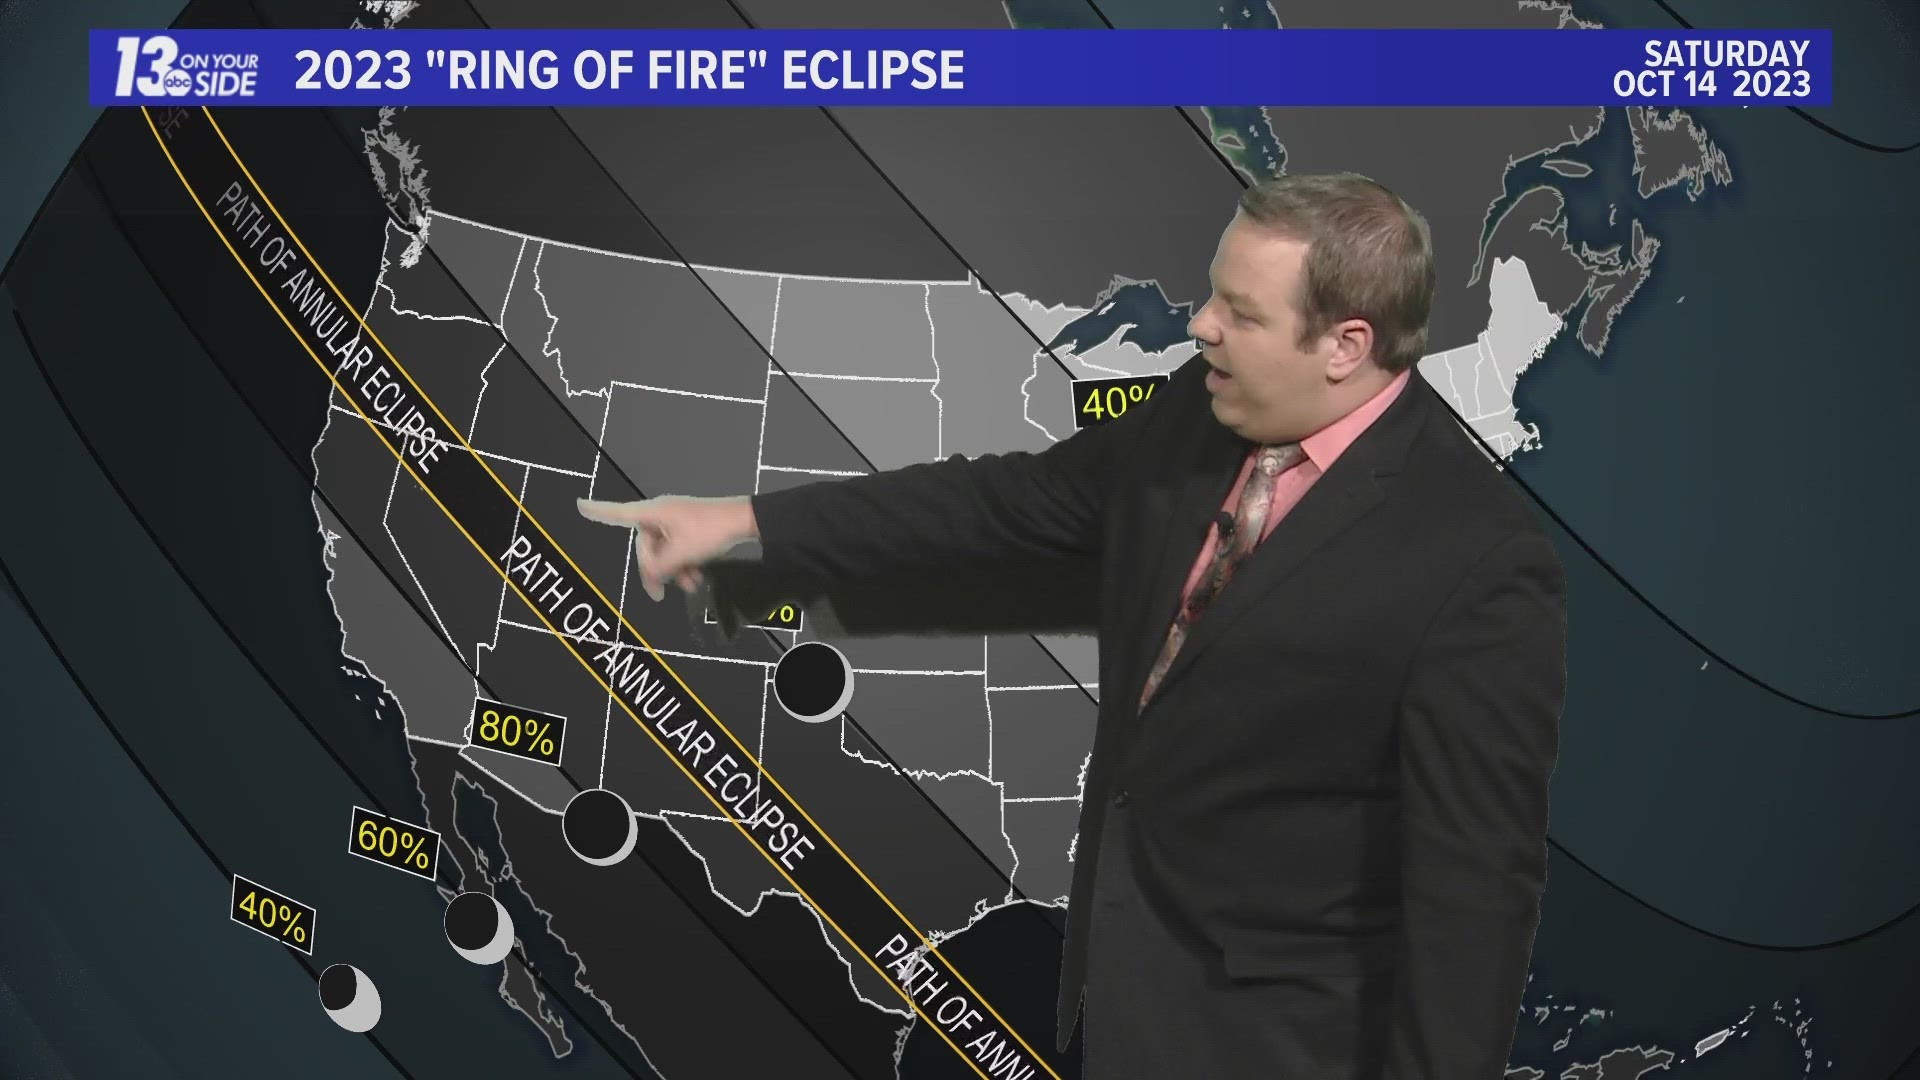 Meteorologist Michael Behrens has bad news for those looking to see an eclipse this weekend in West Michigan!